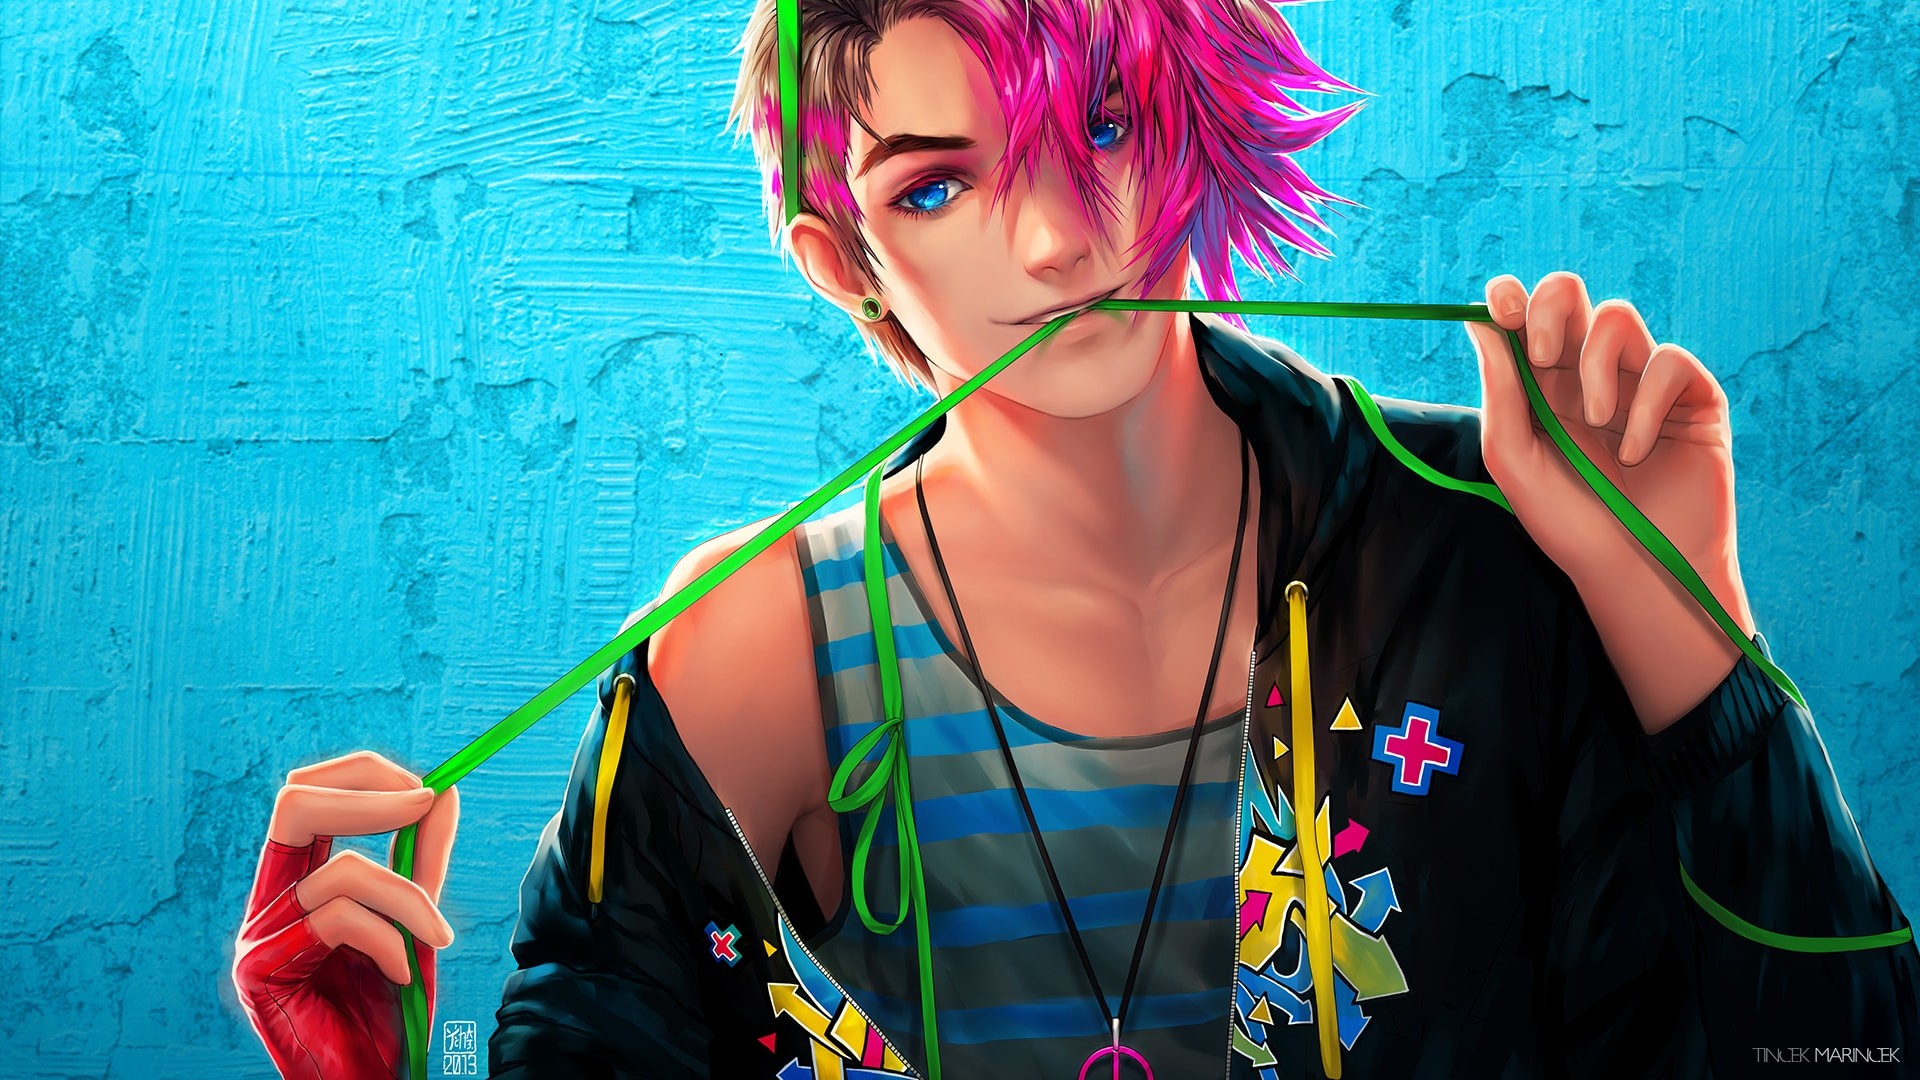 Cute Anime Boy HD Wallpapers 4K  Best Anime Man APK for Android Download